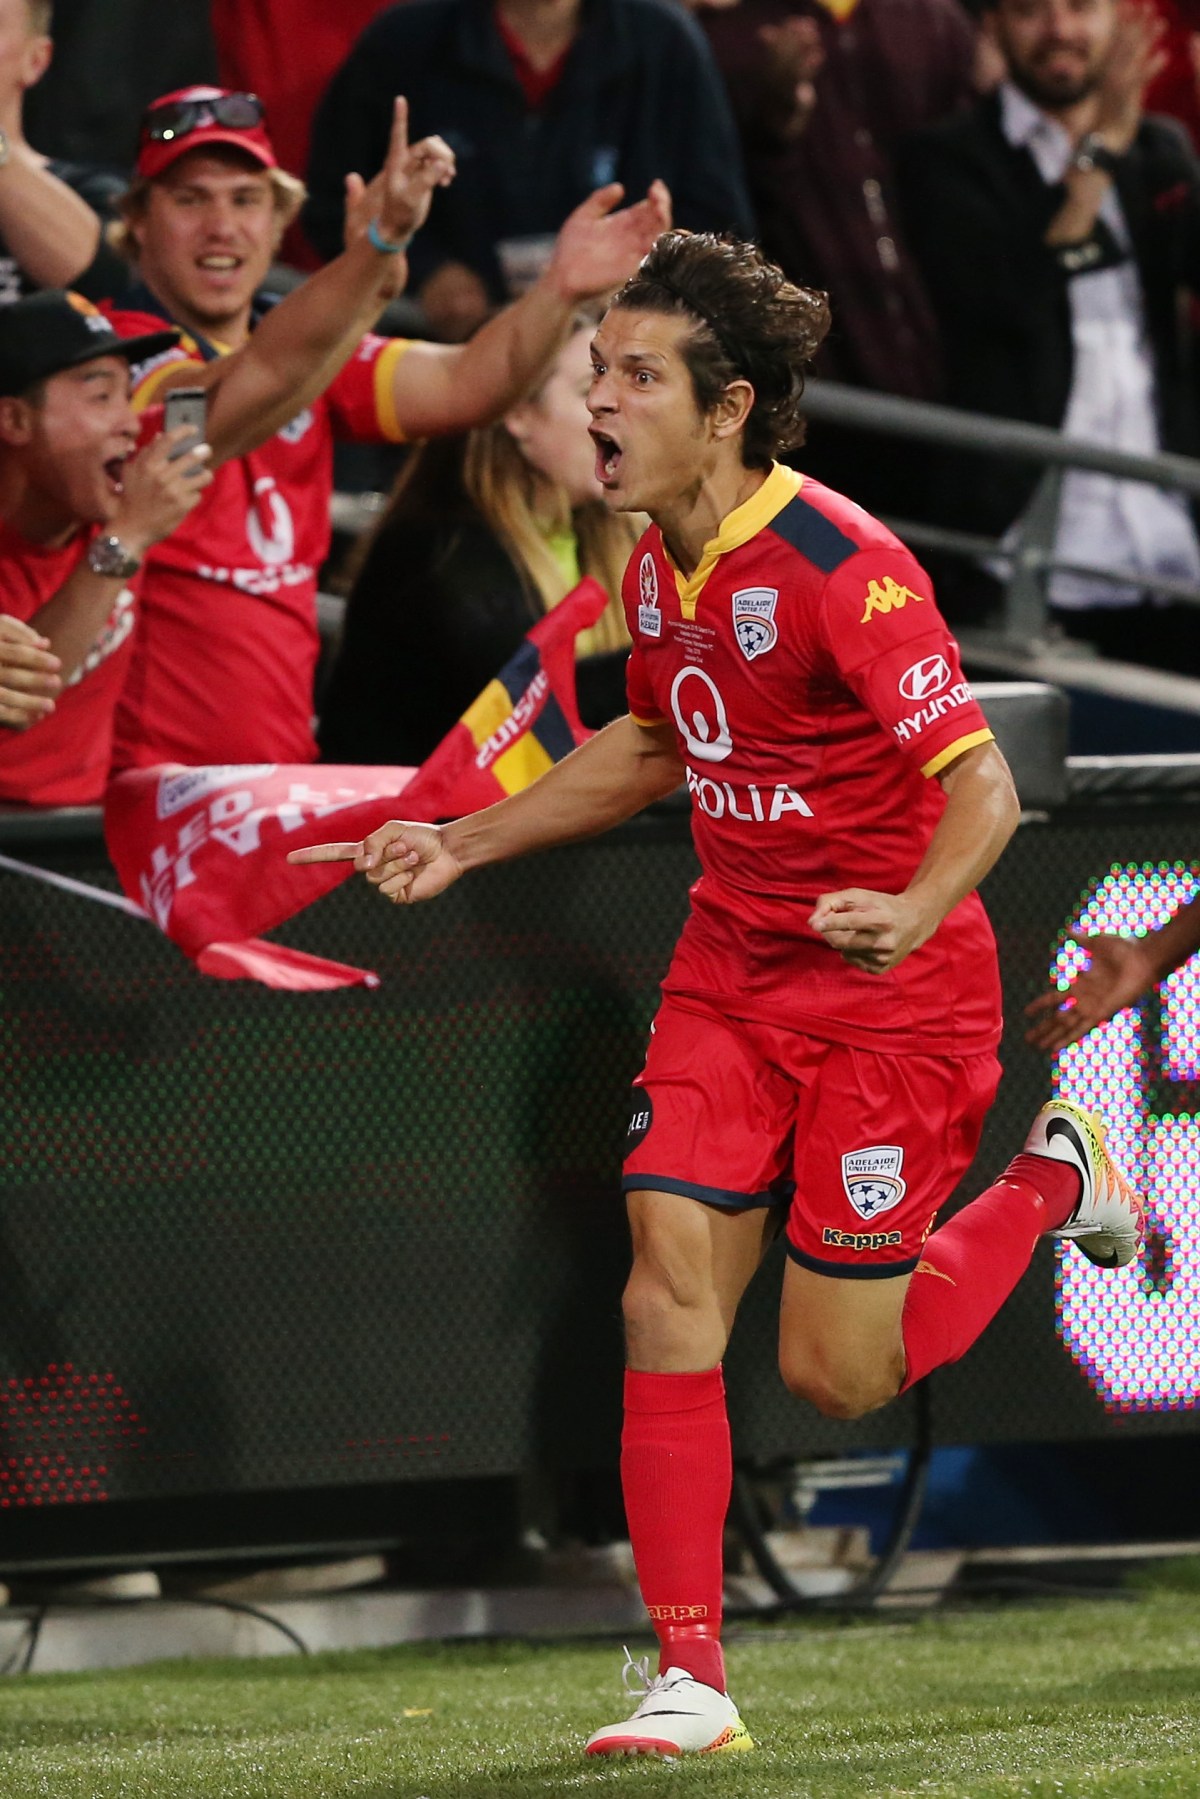 Pablo Sanchez of United celebrates their third goal during the A-League Grand Final between Adelaide United and the Western Sydney Wanderers at Adelaide Oval in Adelaide, Sunday, May 1, 2016. (AAP Image/James Elsby) NO ARCHIVING, EDITORIAL USE ONLY